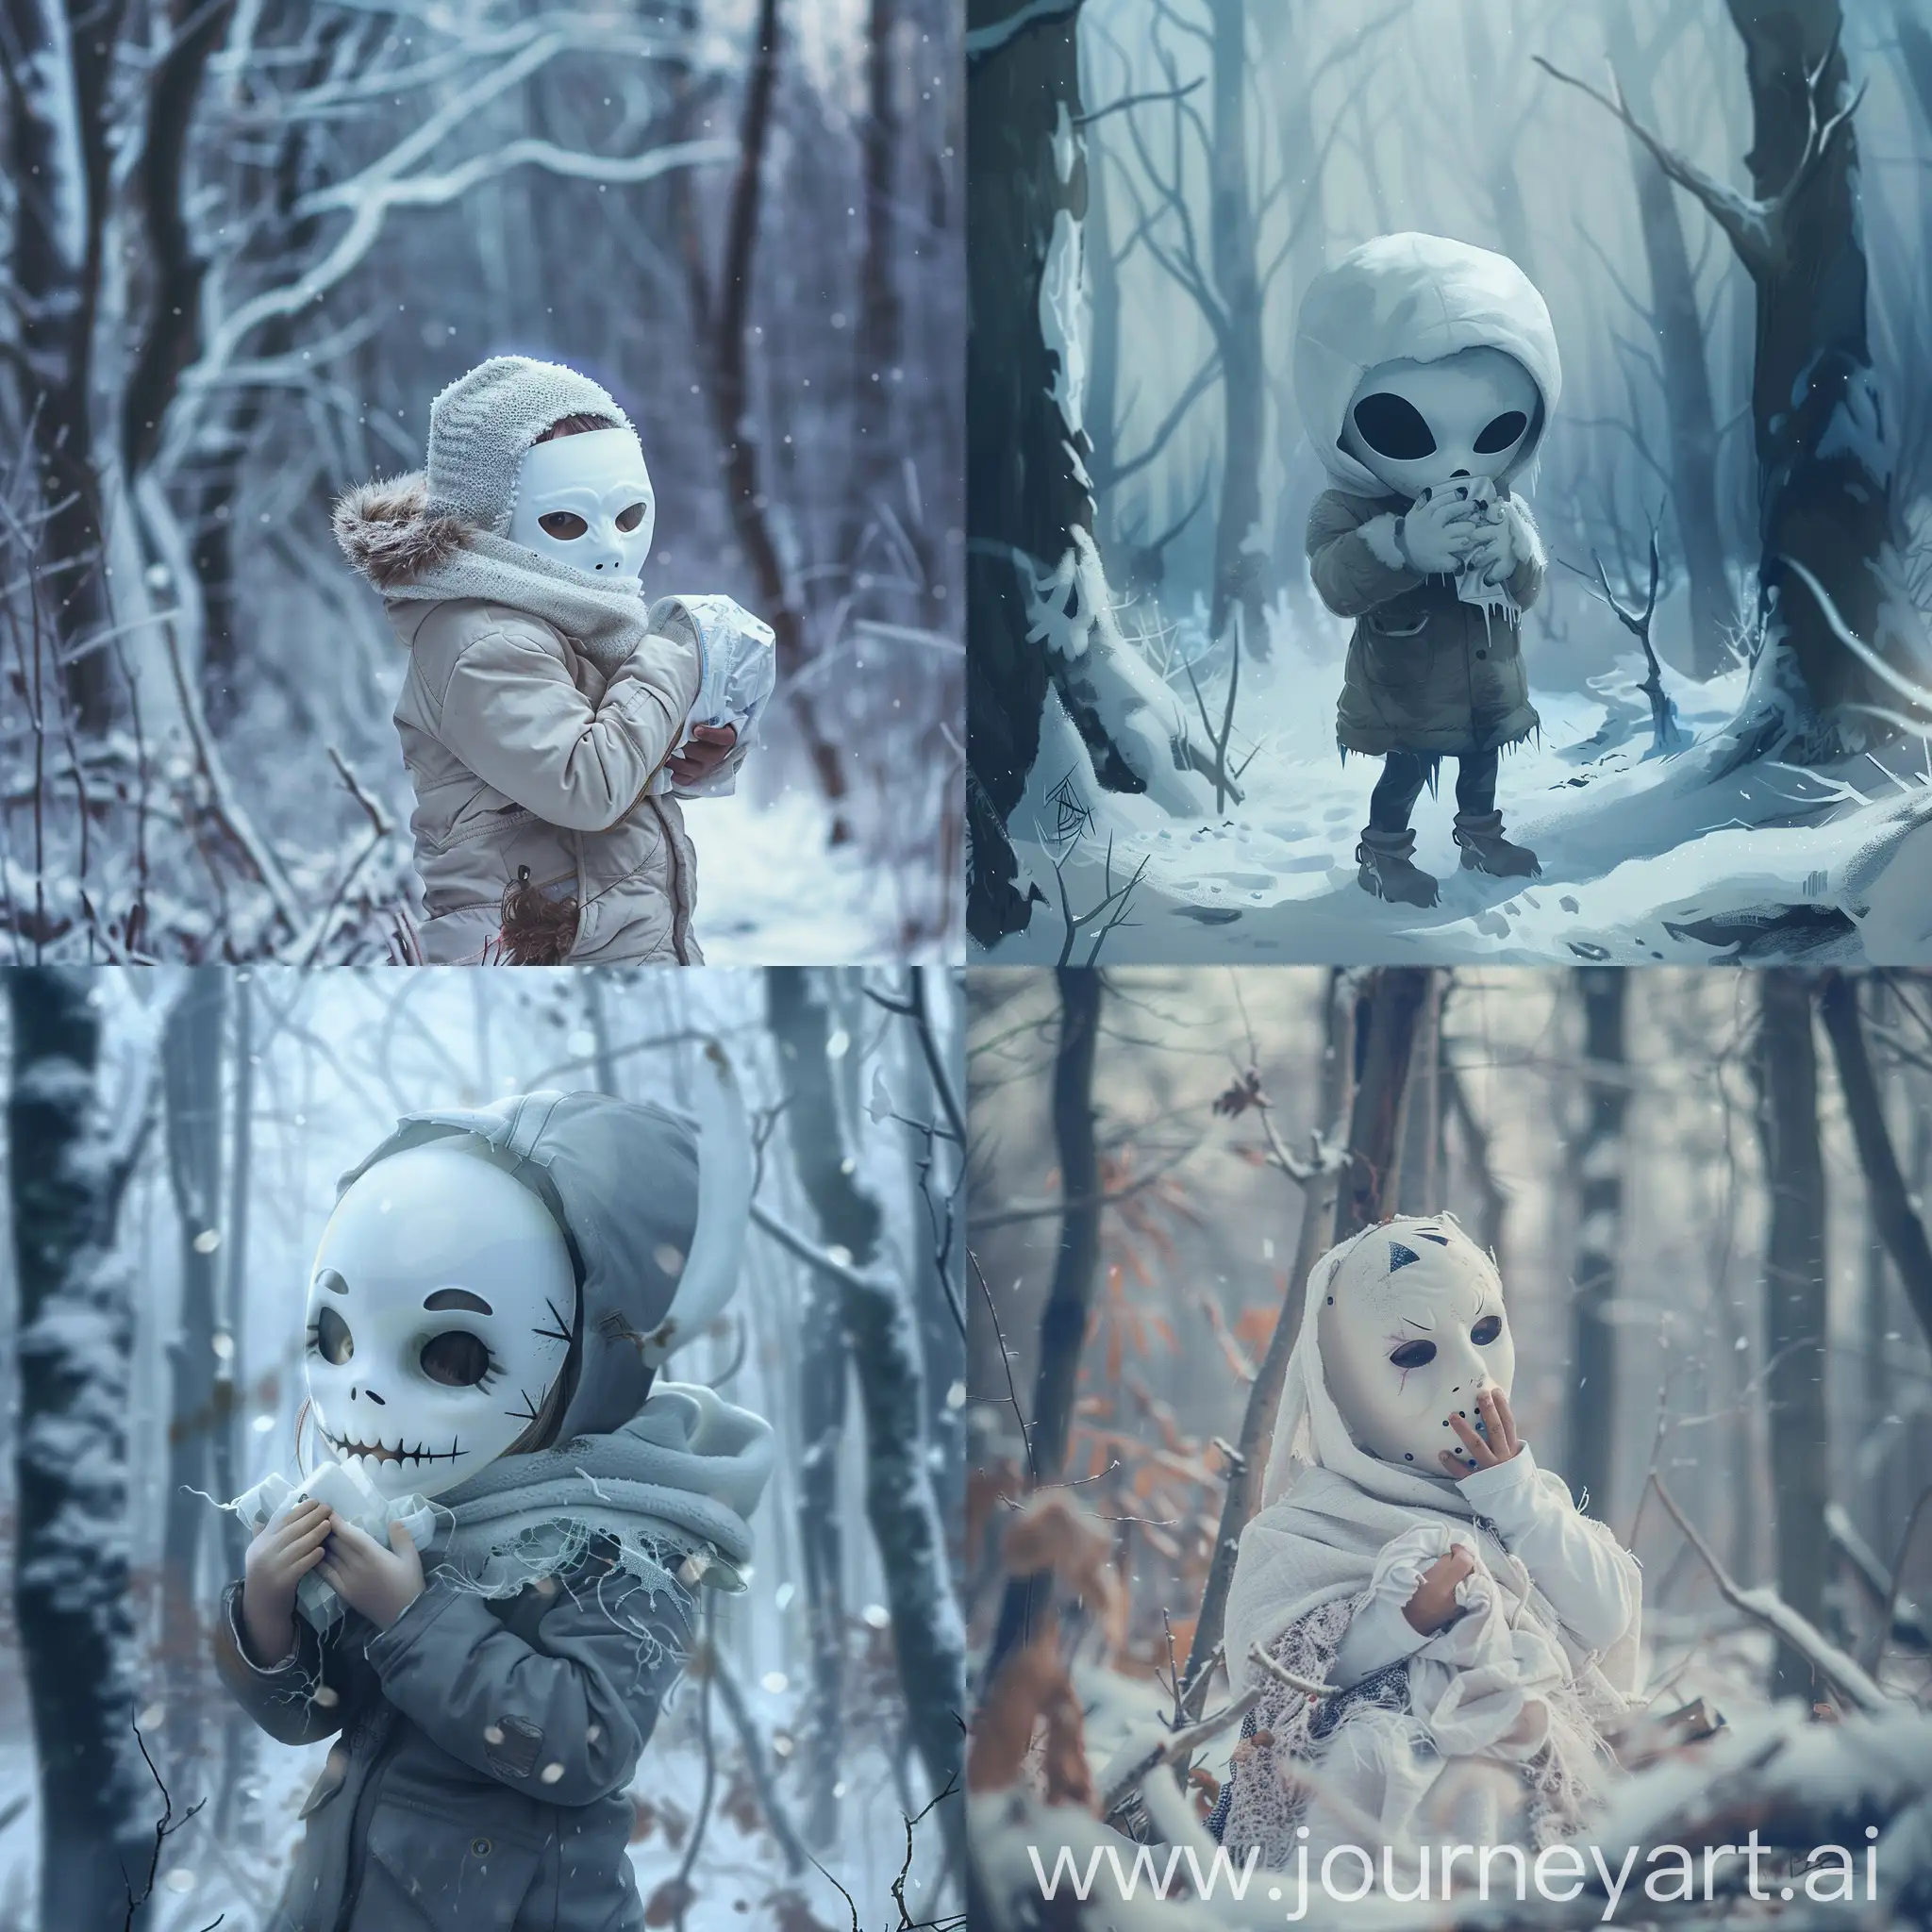 create an image inspired by a incerraat child in an wintery forrest, the child is wearing a white creapy mask and is holding sick